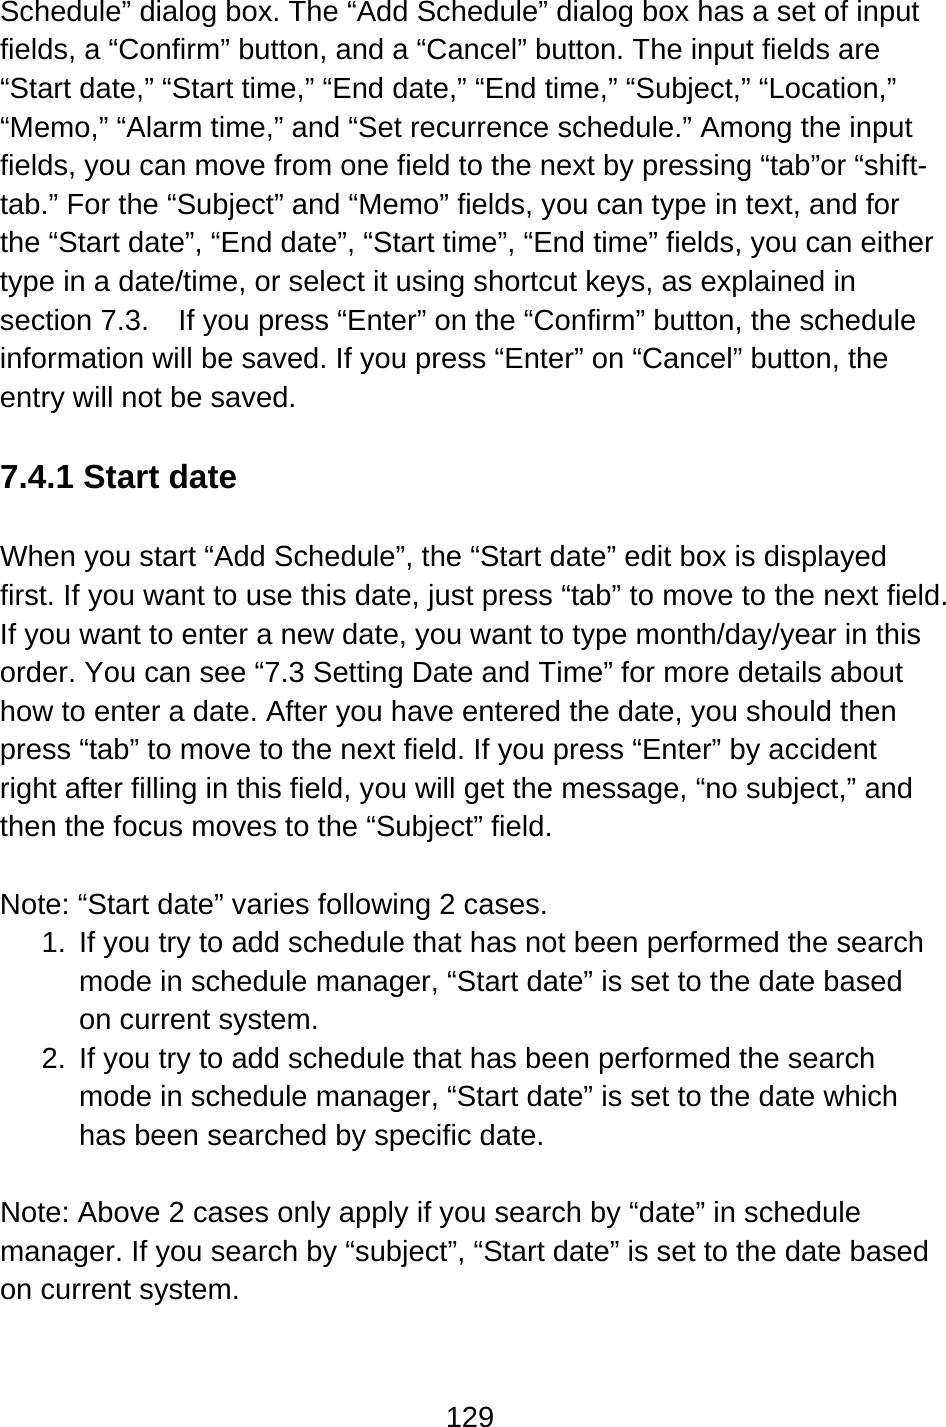 129  Schedule” dialog box. The “Add Schedule” dialog box has a set of input fields, a “Confirm” button, and a “Cancel” button. The input fields are “Start date,” “Start time,” “End date,” “End time,” “Subject,” “Location,” “Memo,” “Alarm time,” and “Set recurrence schedule.” Among the input fields, you can move from one field to the next by pressing “tab”or “shift-tab.” For the “Subject” and “Memo” fields, you can type in text, and for the “Start date”, “End date”, “Start time”, “End time” fields, you can either type in a date/time, or select it using shortcut keys, as explained in section 7.3.    If you press “Enter” on the “Confirm” button, the schedule information will be saved. If you press “Enter” on “Cancel” button, the entry will not be saved.  7.4.1 Start date  When you start “Add Schedule”, the “Start date” edit box is displayed first. If you want to use this date, just press “tab” to move to the next field. If you want to enter a new date, you want to type month/day/year in this order. You can see “7.3 Setting Date and Time” for more details about how to enter a date. After you have entered the date, you should then press “tab” to move to the next field. If you press “Enter” by accident right after filling in this field, you will get the message, “no subject,” and then the focus moves to the “Subject” field.  Note: “Start date” varies following 2 cases.   1.  If you try to add schedule that has not been performed the search mode in schedule manager, “Start date” is set to the date based on current system. 2.  If you try to add schedule that has been performed the search mode in schedule manager, “Start date” is set to the date which has been searched by specific date.  Note: Above 2 cases only apply if you search by “date” in schedule manager. If you search by “subject”, “Start date” is set to the date based on current system.  